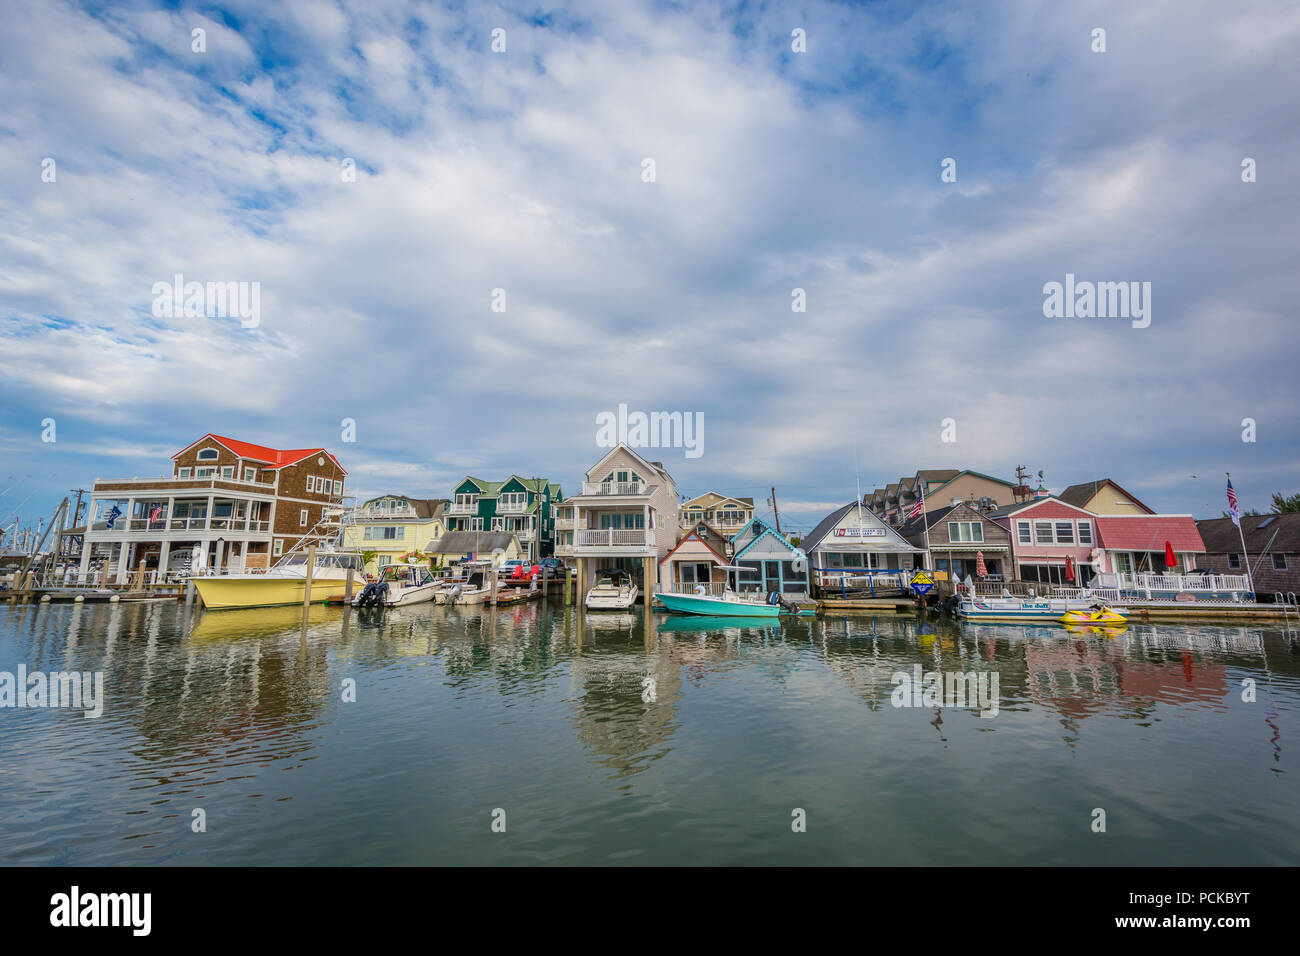 Cape May Hafen, in Cape May, New Jersey. Stockfoto